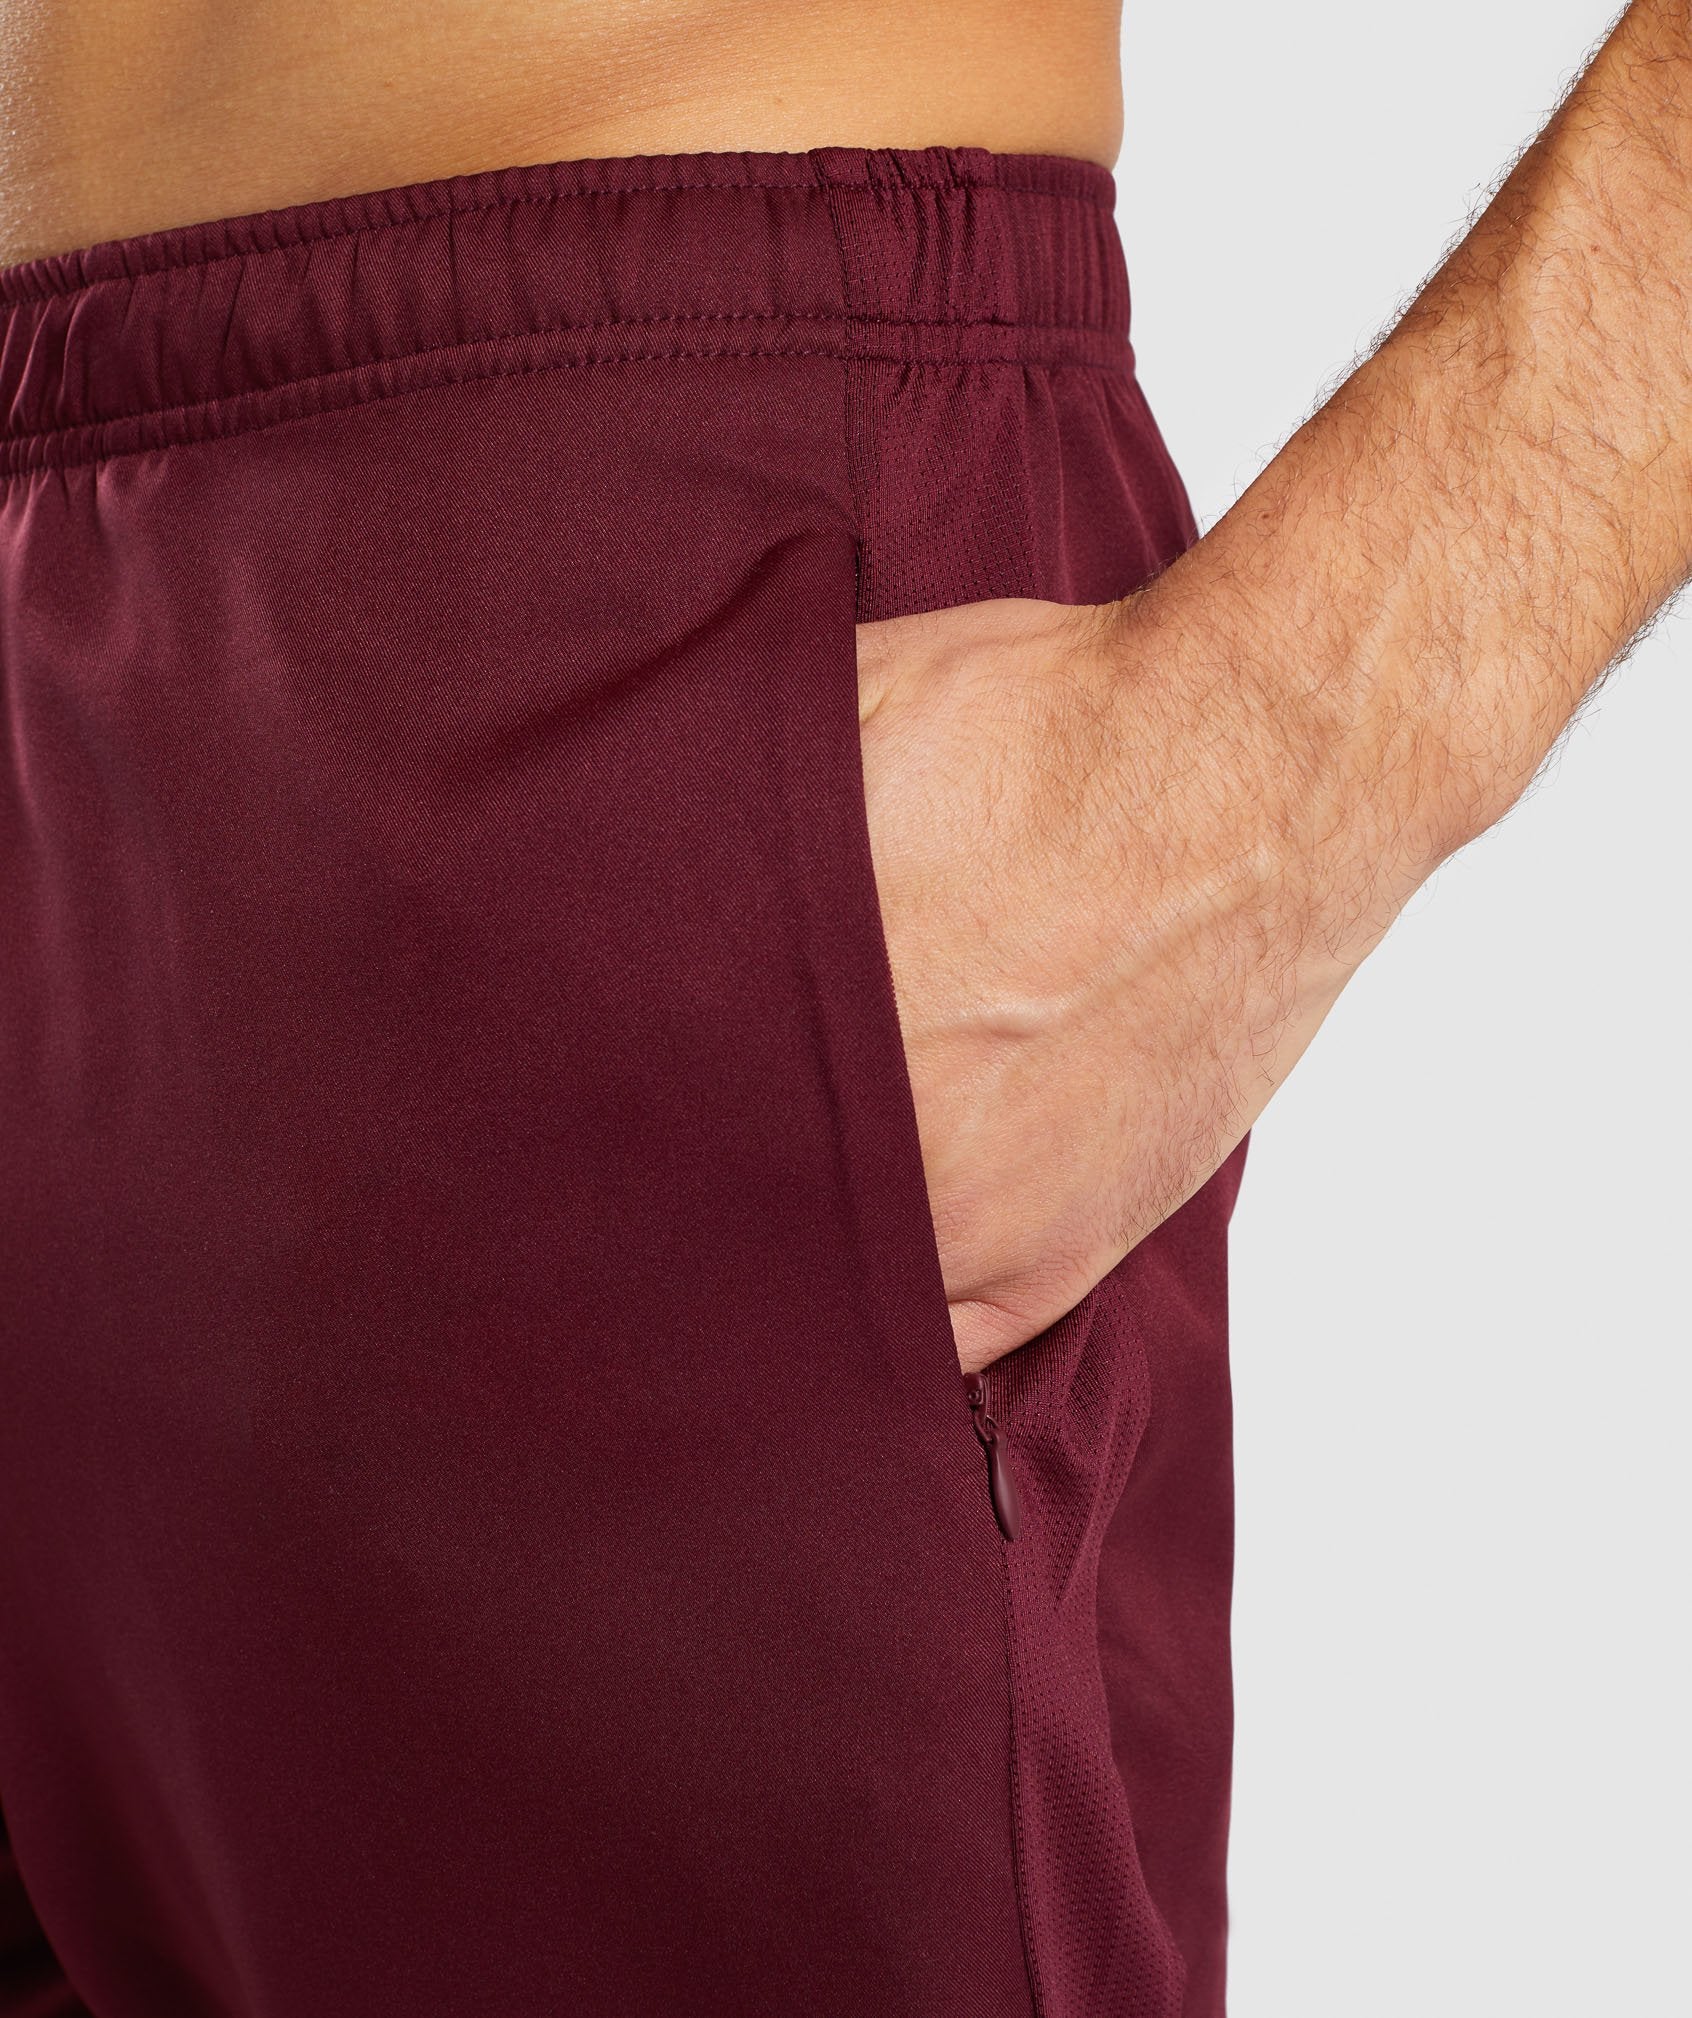 Sport Shorts in Port - view 5